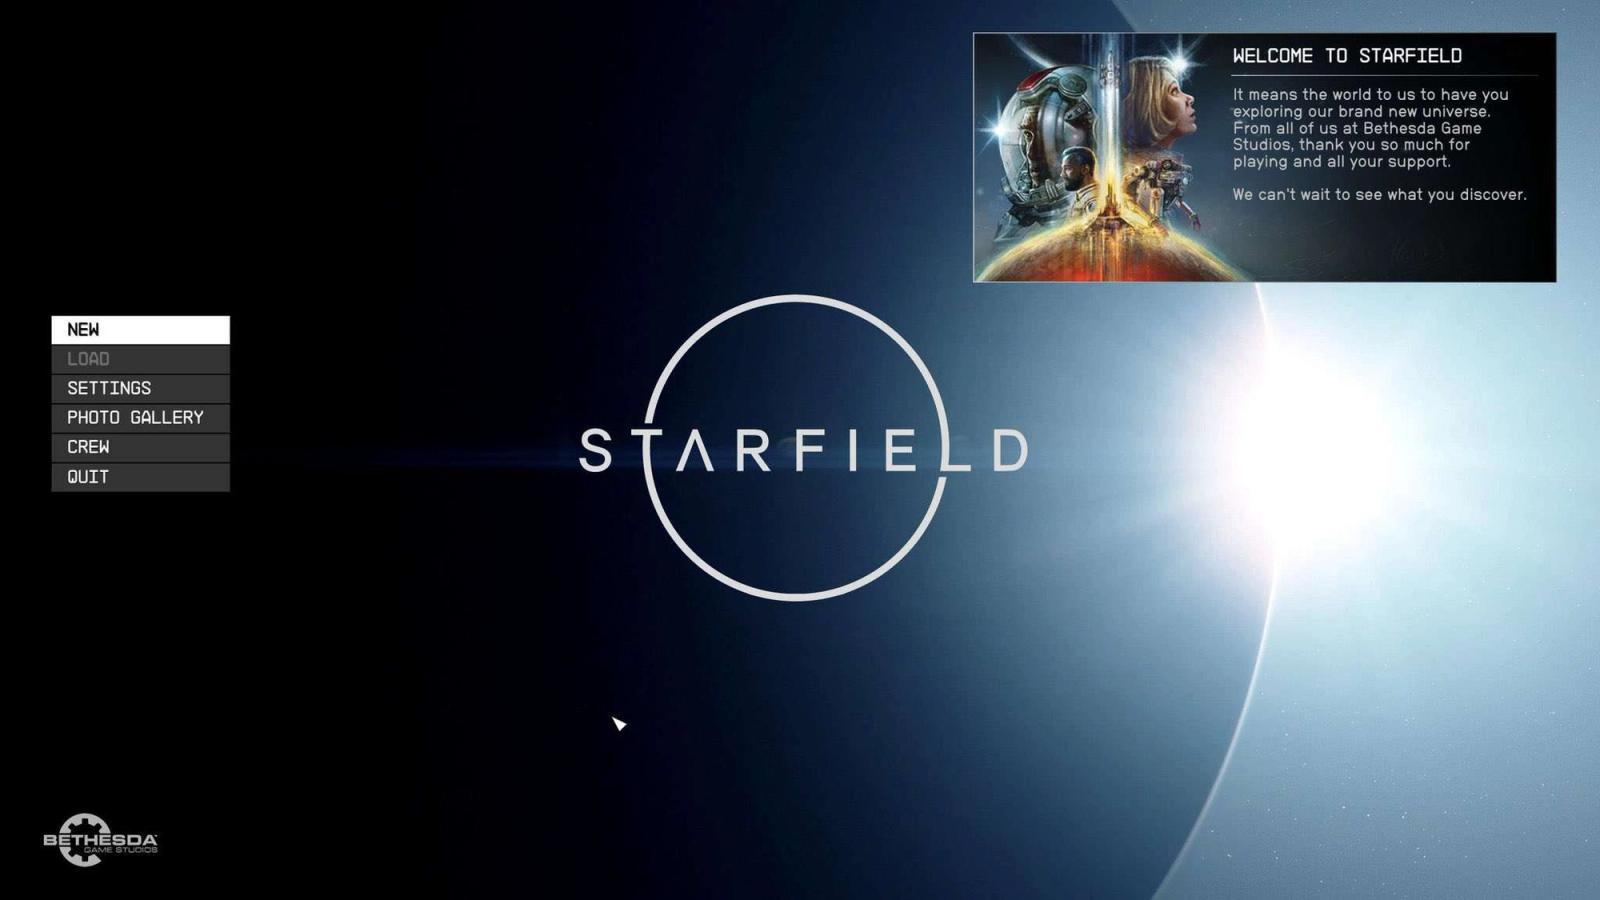 The start screen for Starfield